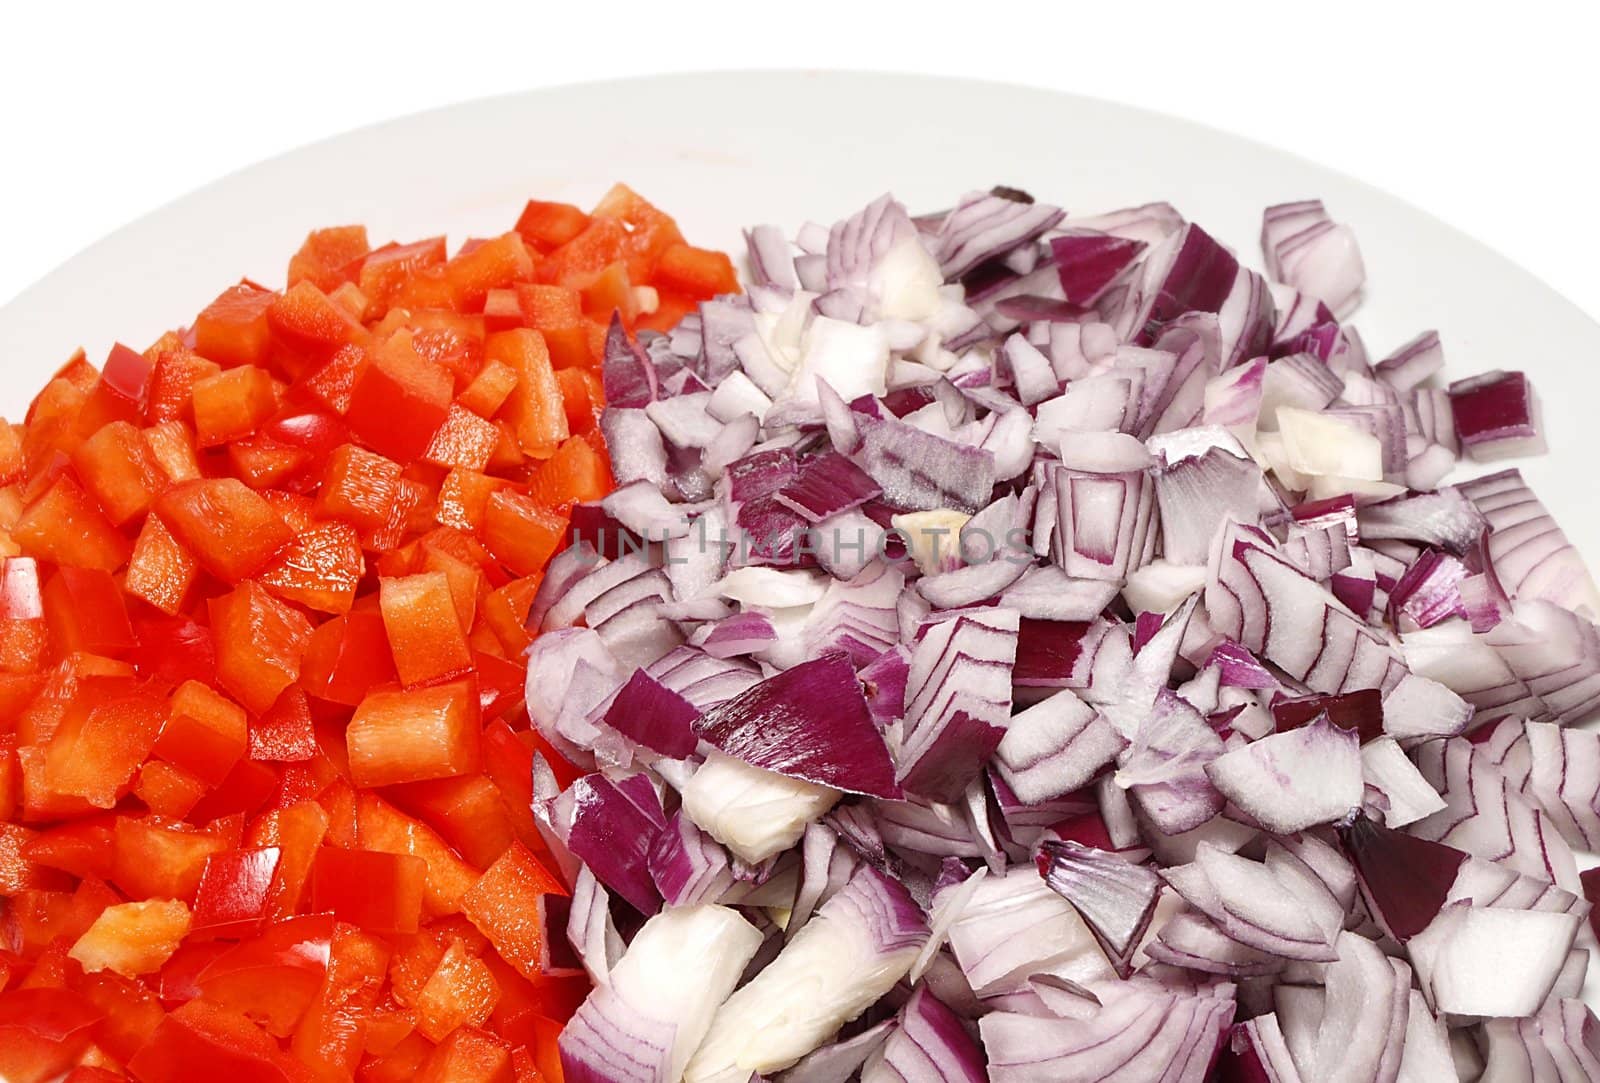 Red pepper and red onion by Arvebettum